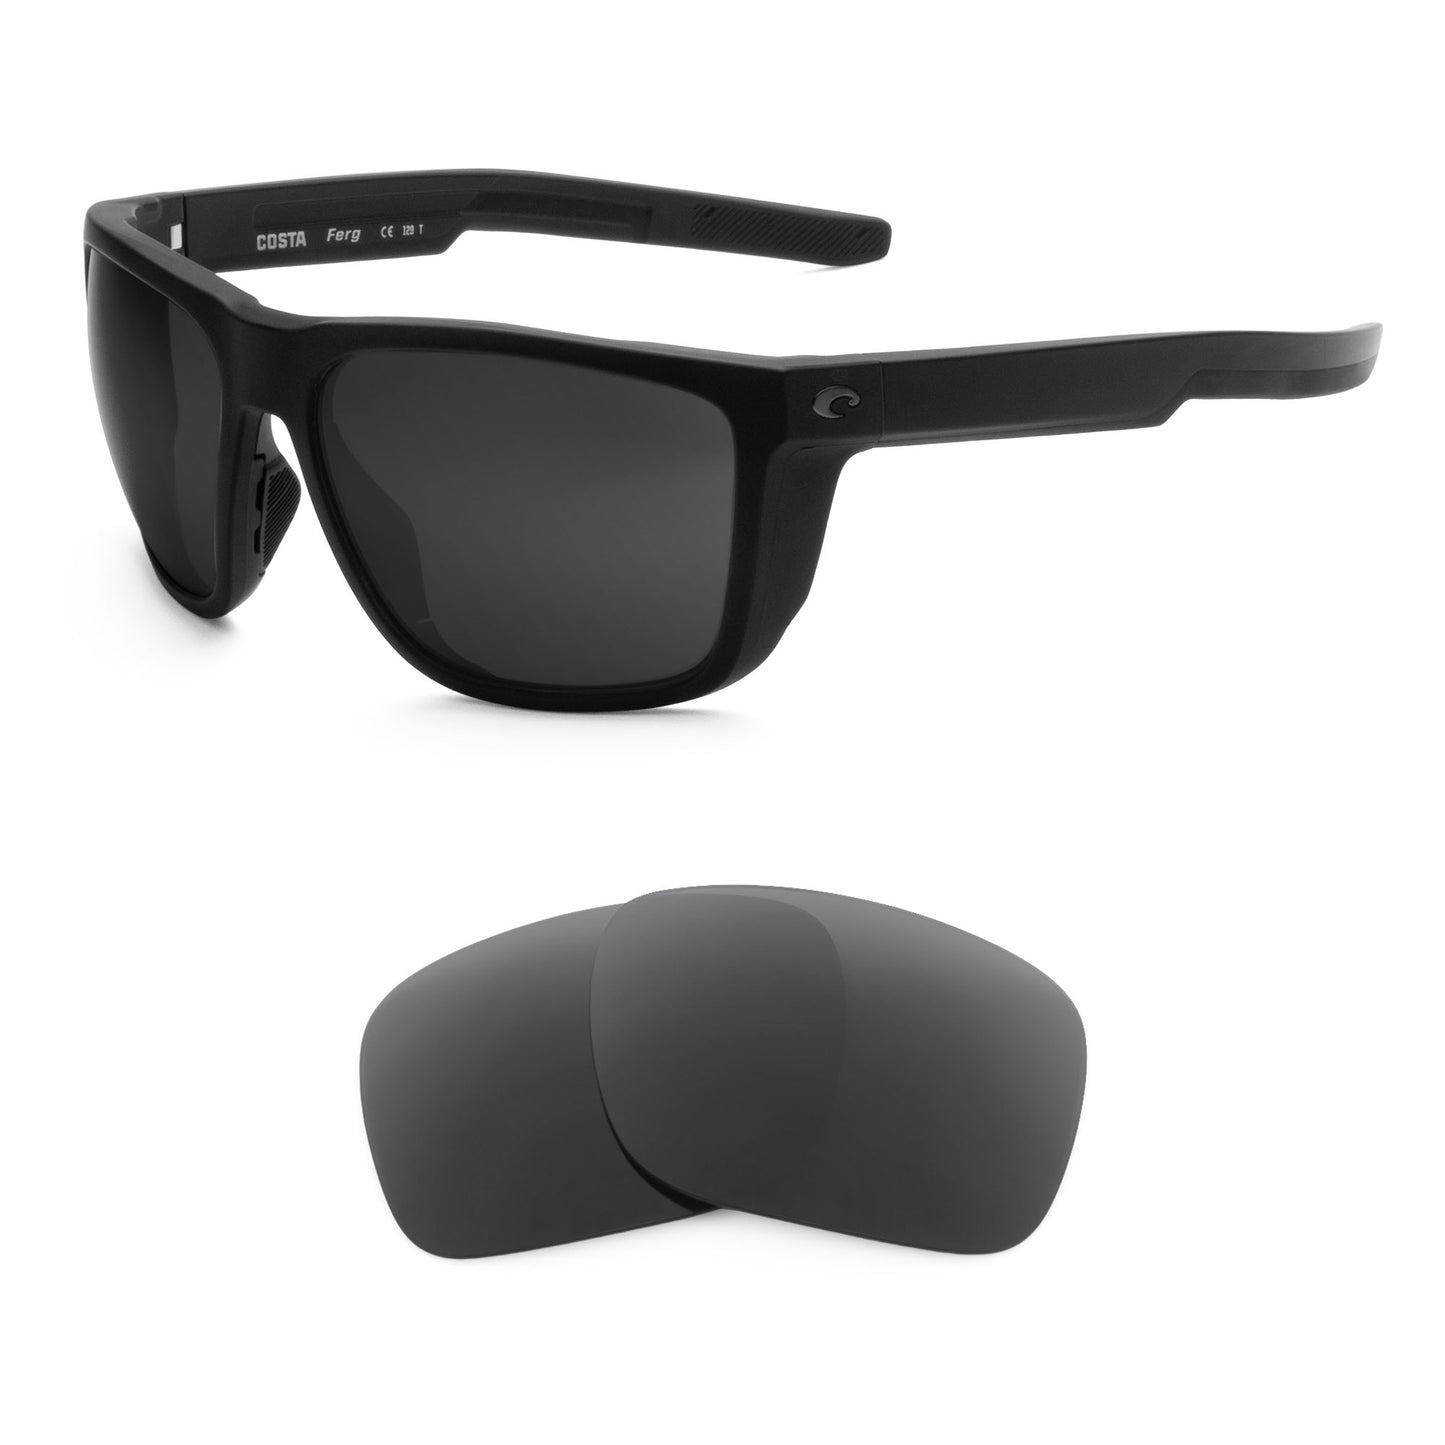 Costa Ferg sunglasses with replacement lenses